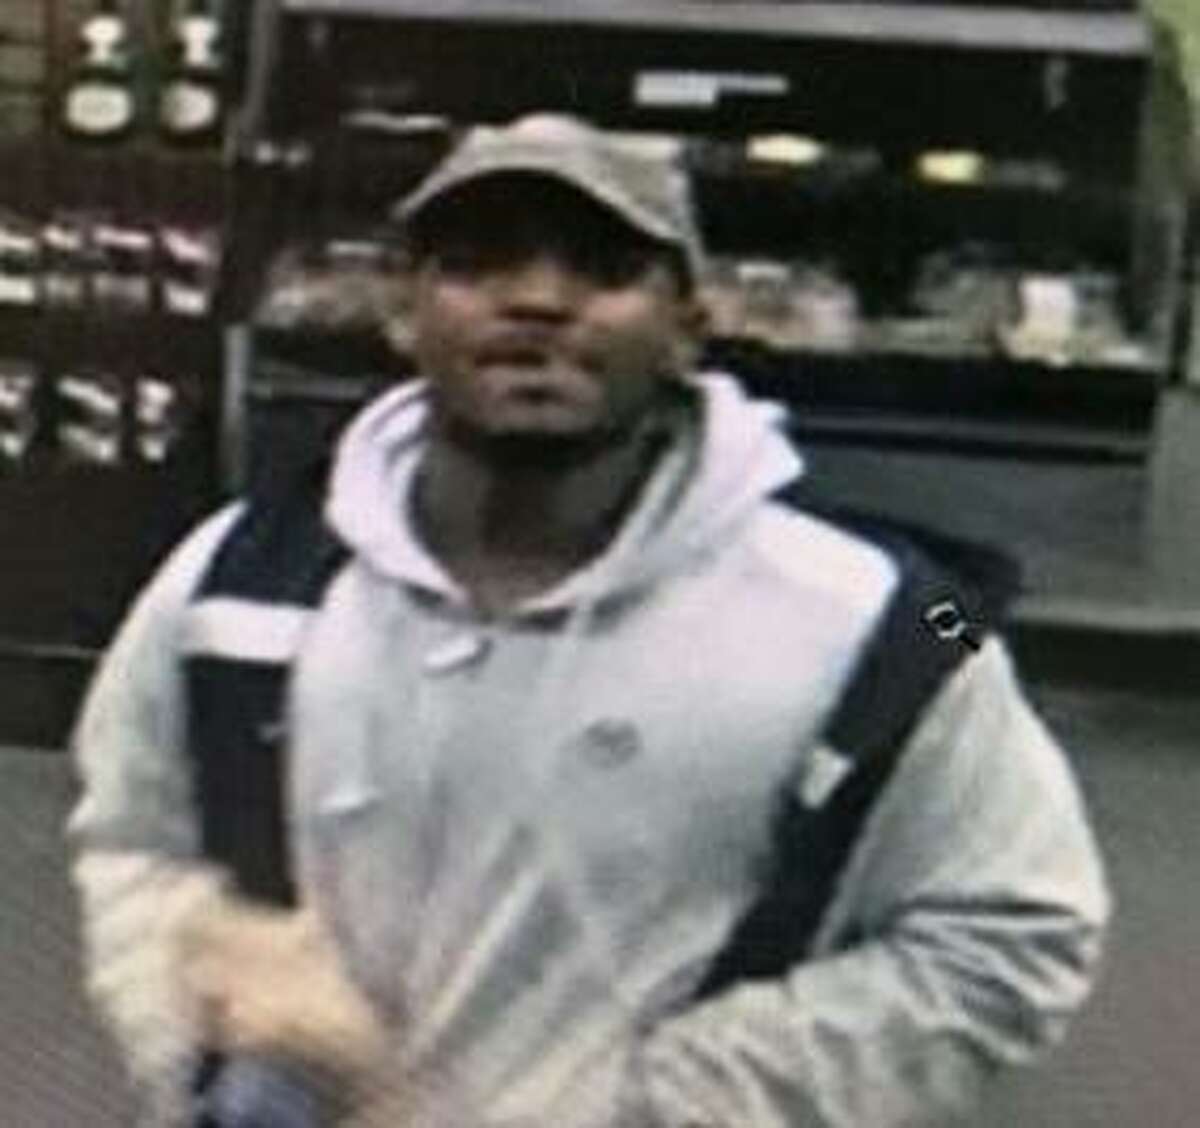 Suspect in Kroger robbery sought by Fort Bend County Sheriff’s Office